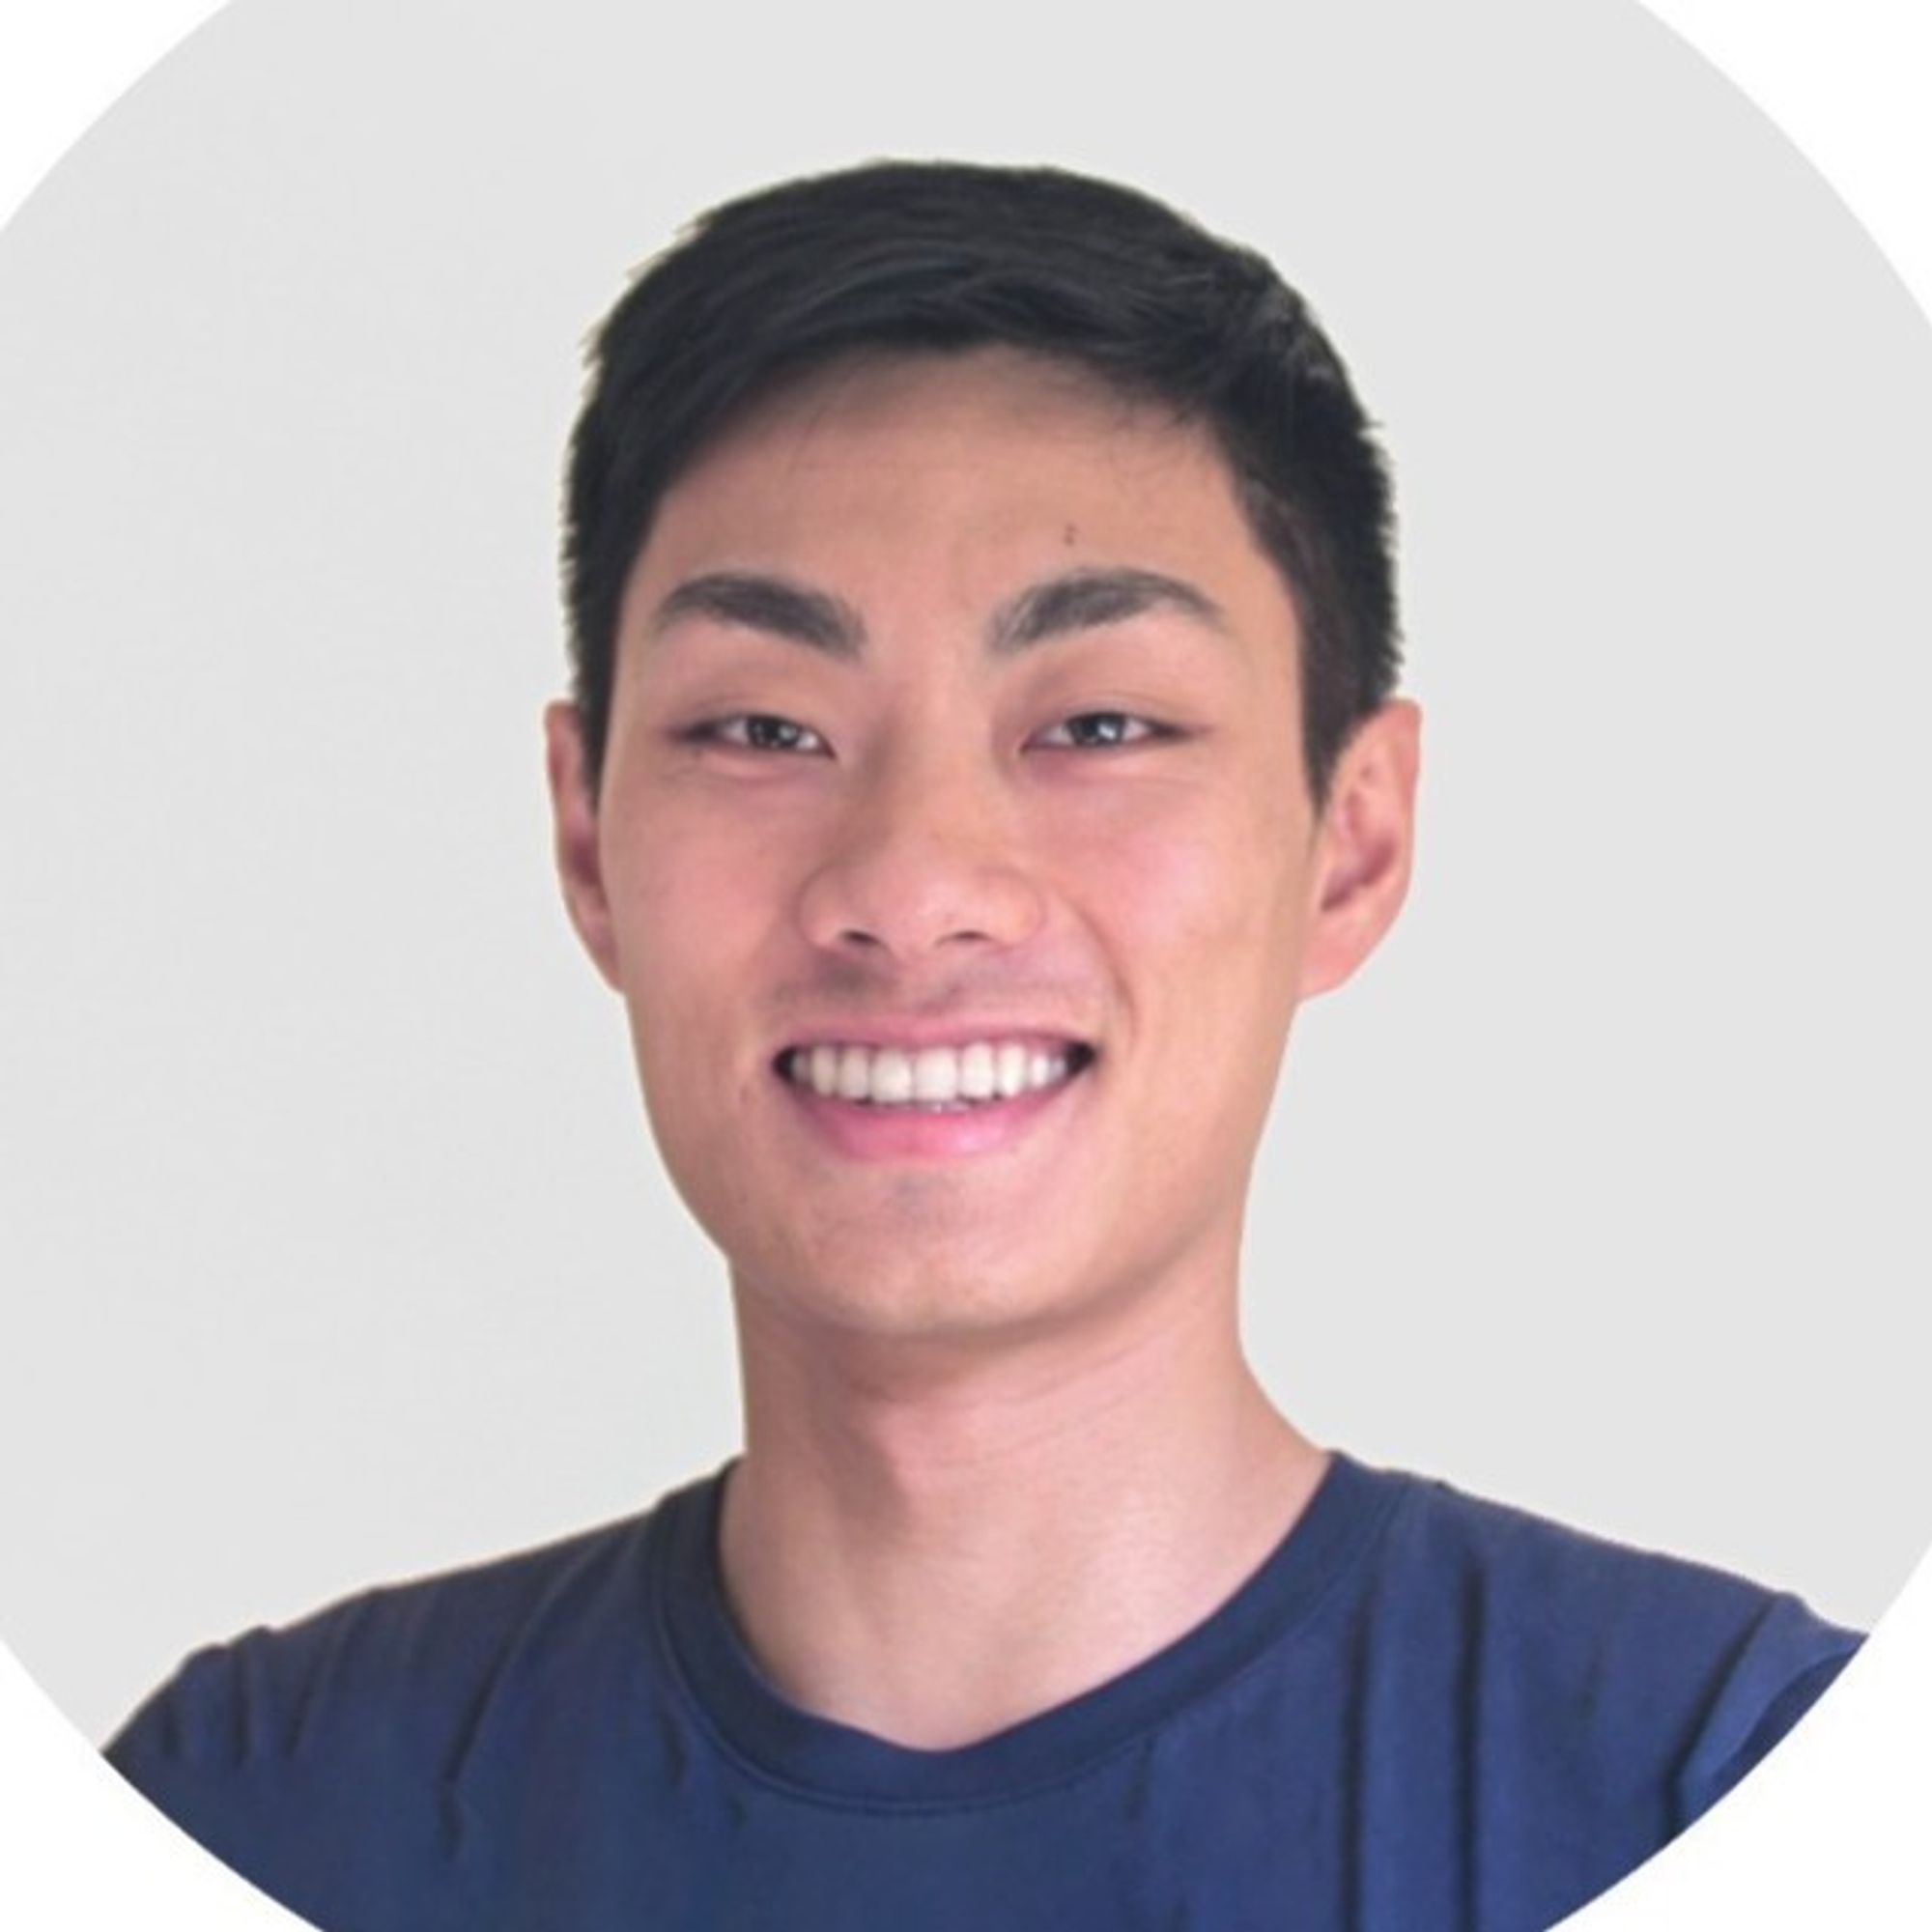 Eric Zhang 
Software Engineer 
Prior Security Lead @Samsara and Security Engineer @Pinterest • Loves surfing, snowboarding, and his dog Cookie